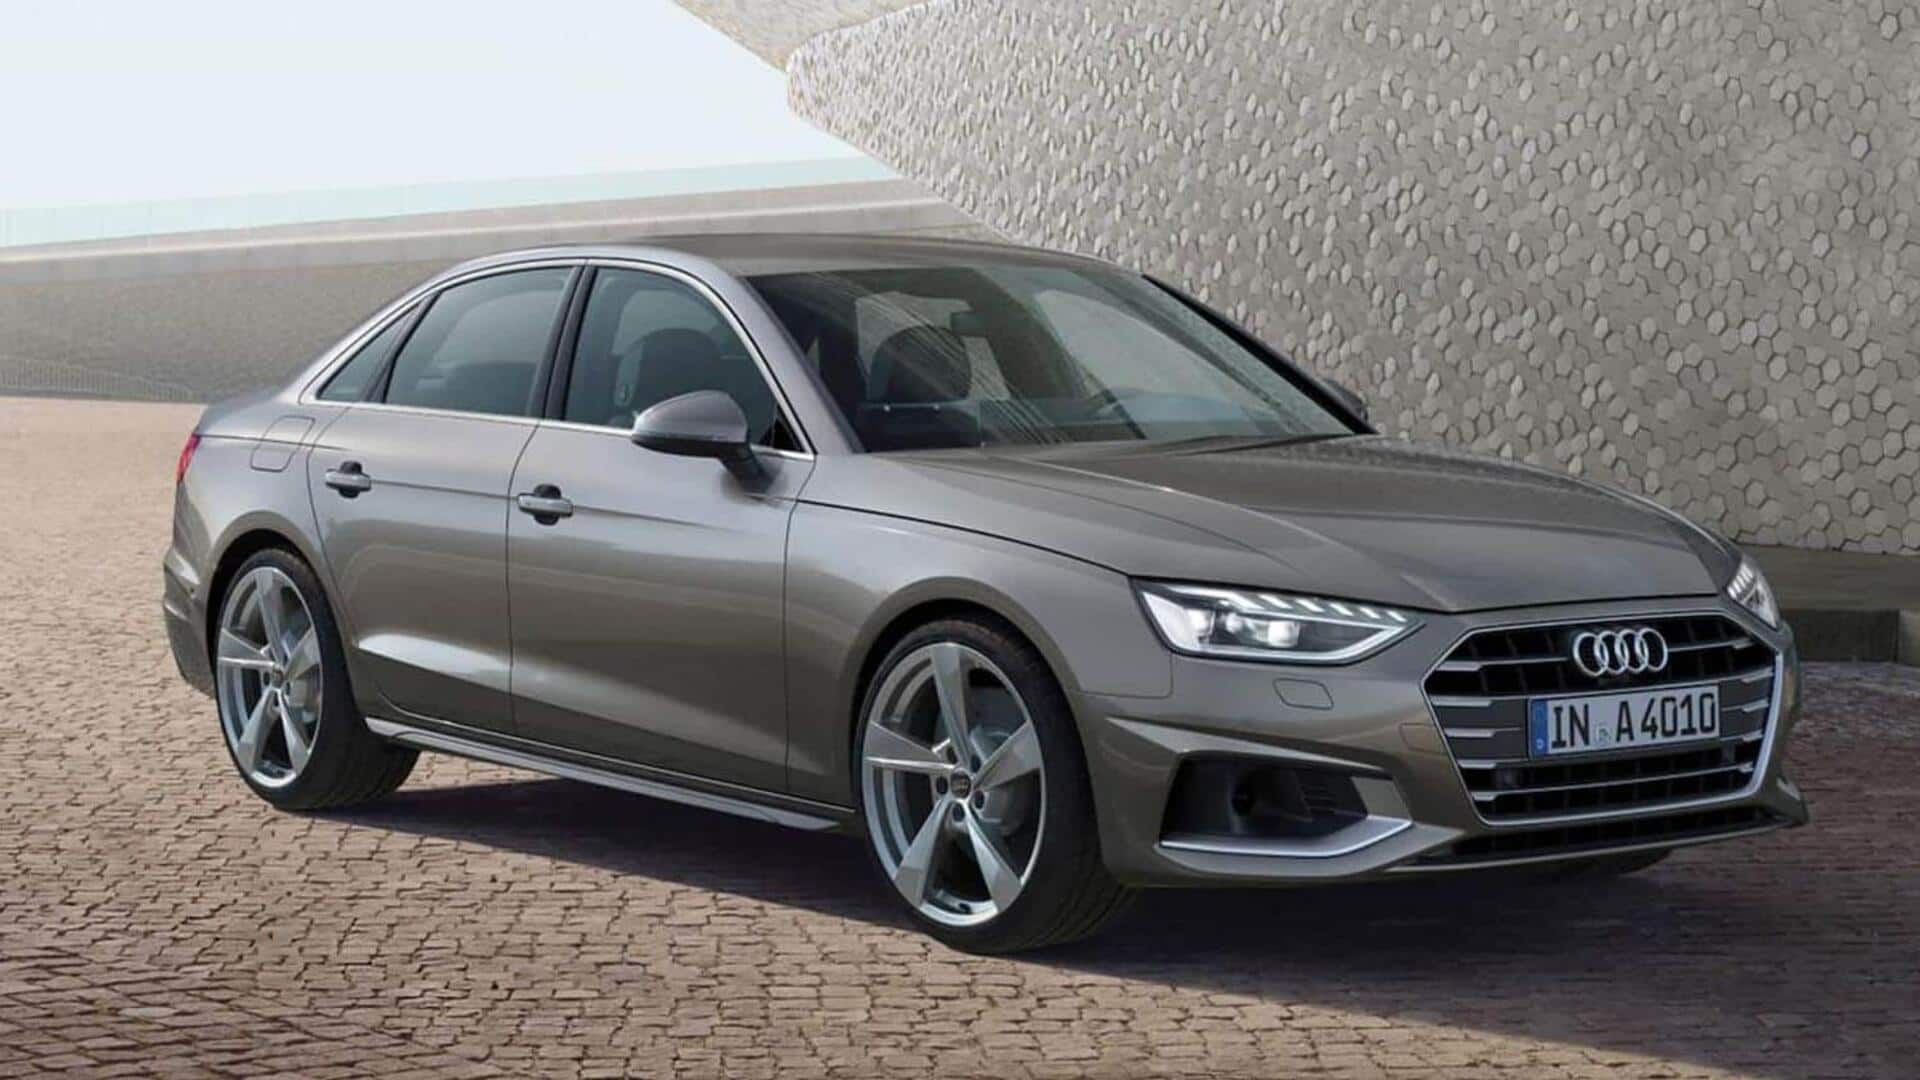 Audi A4 to go electric in 2025: What to expect